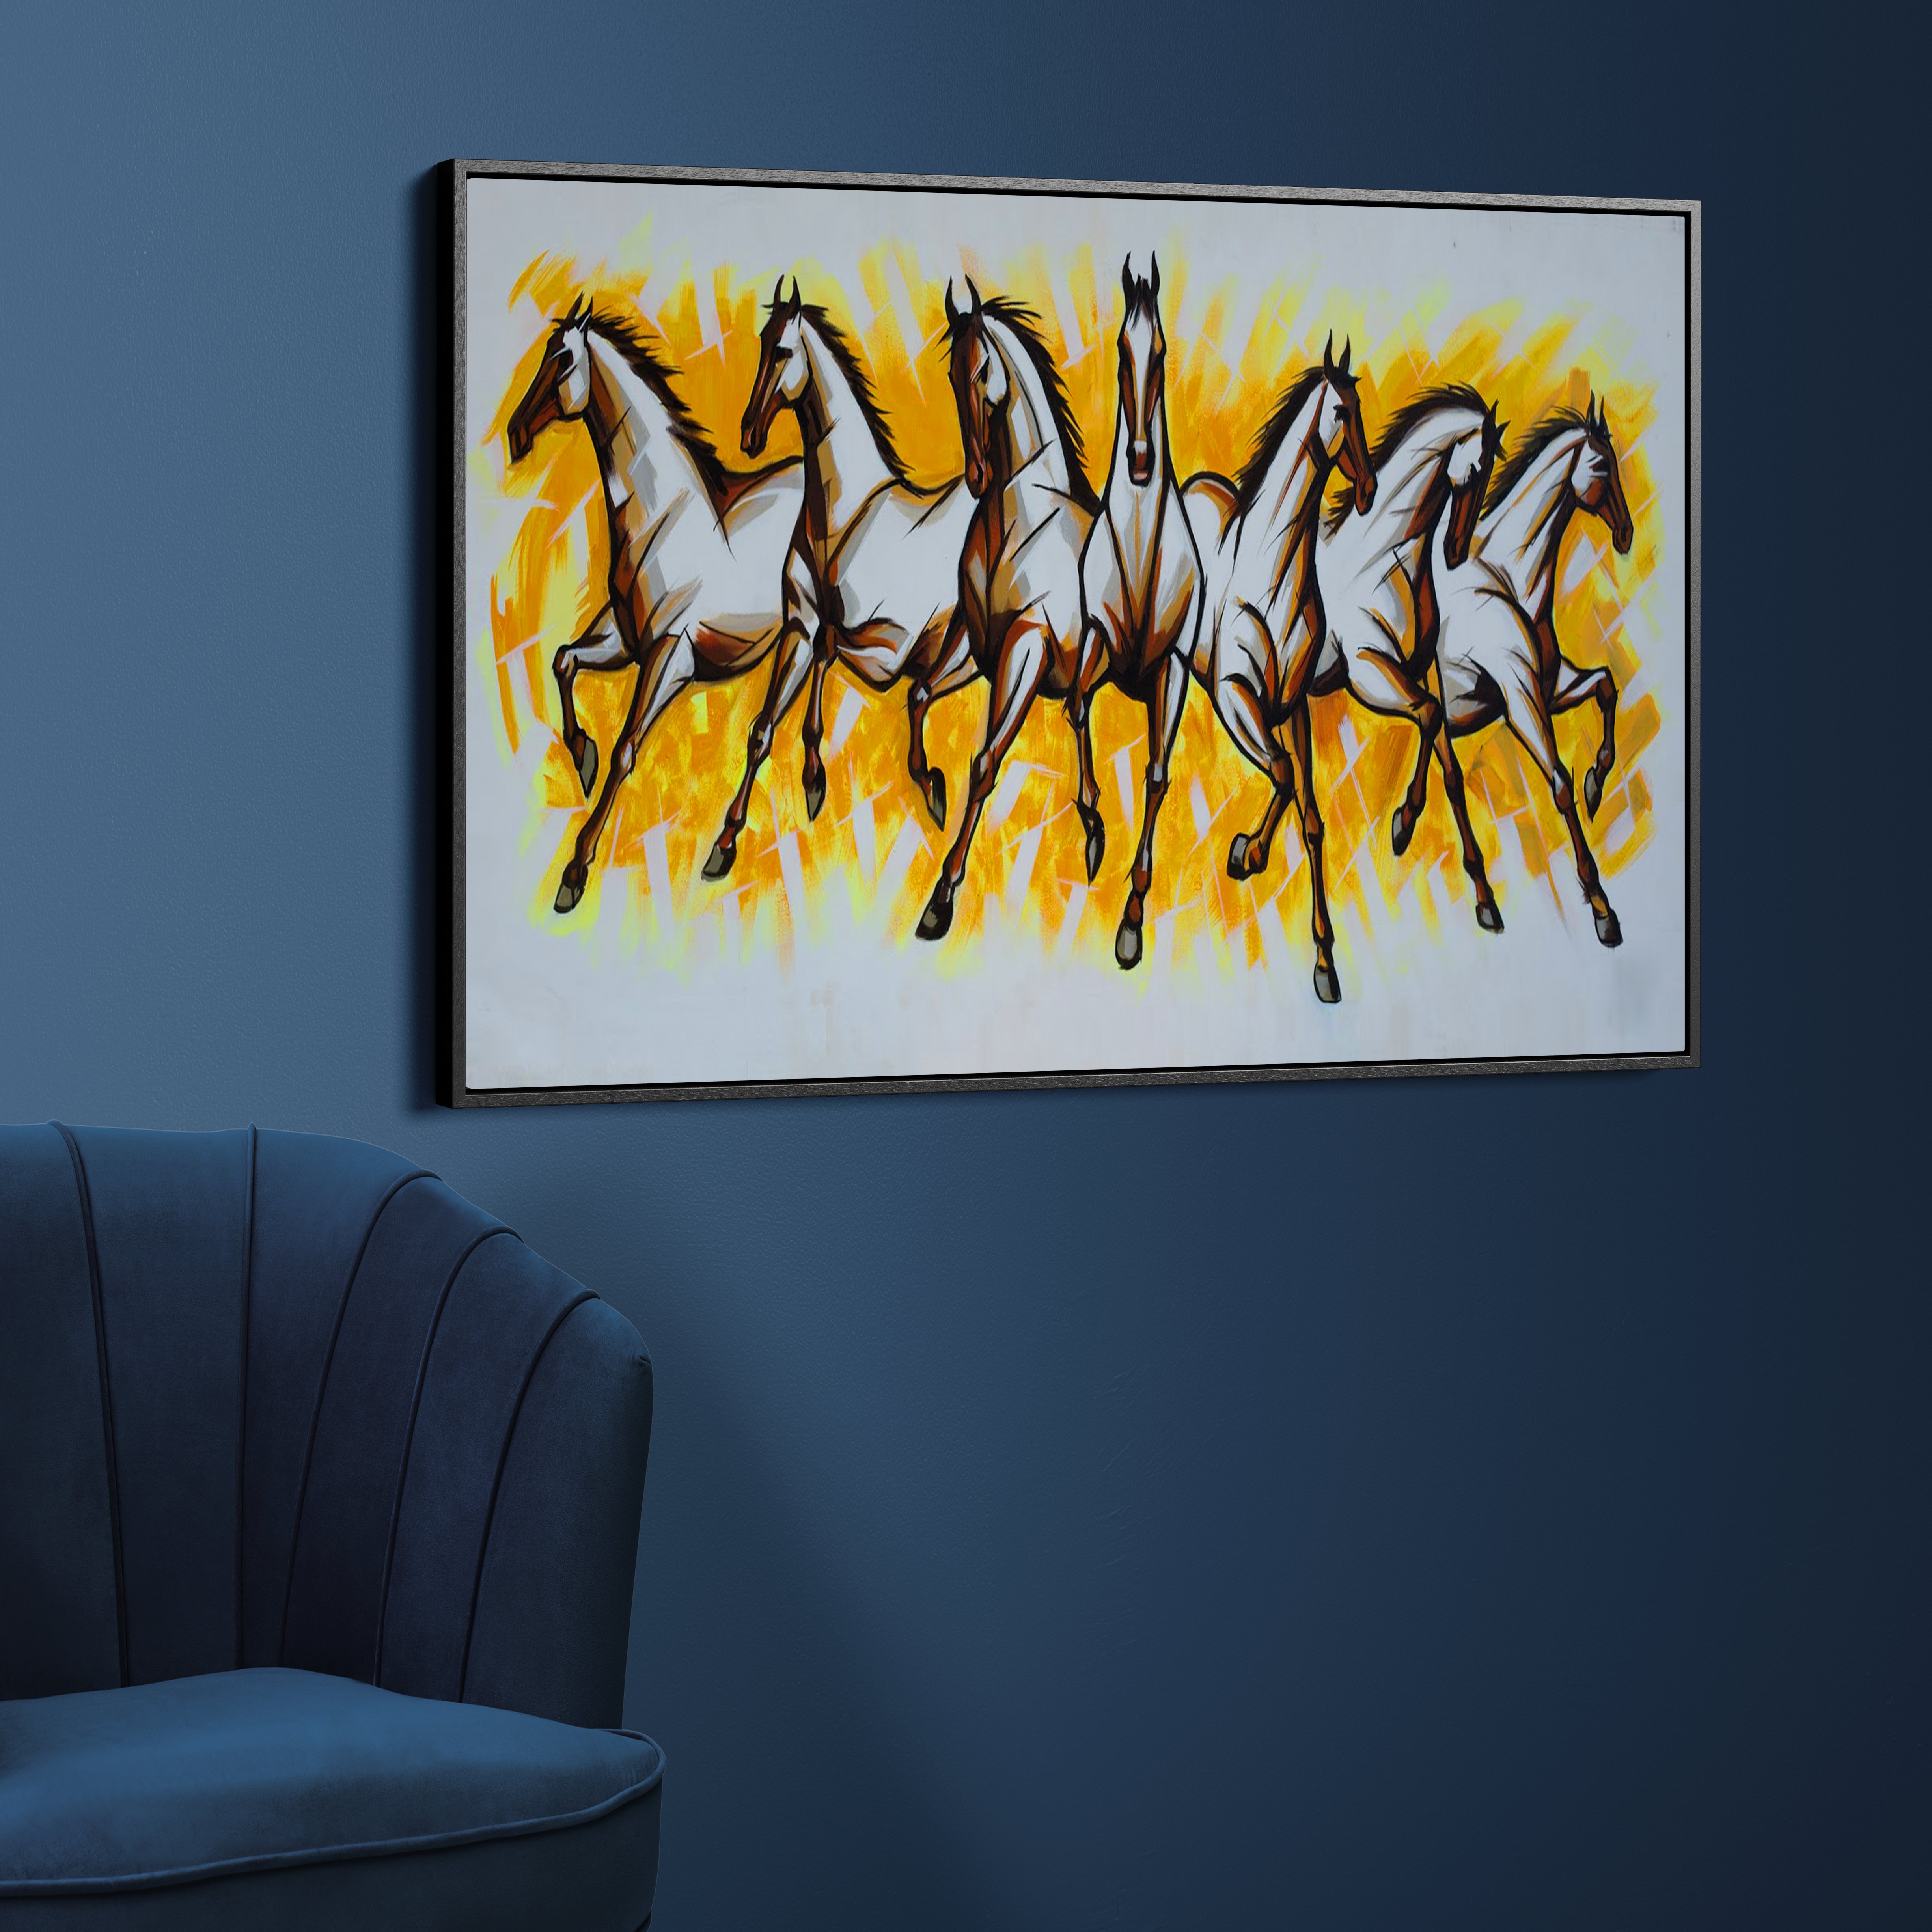 Seven Running Horses Canvas Wall Painting